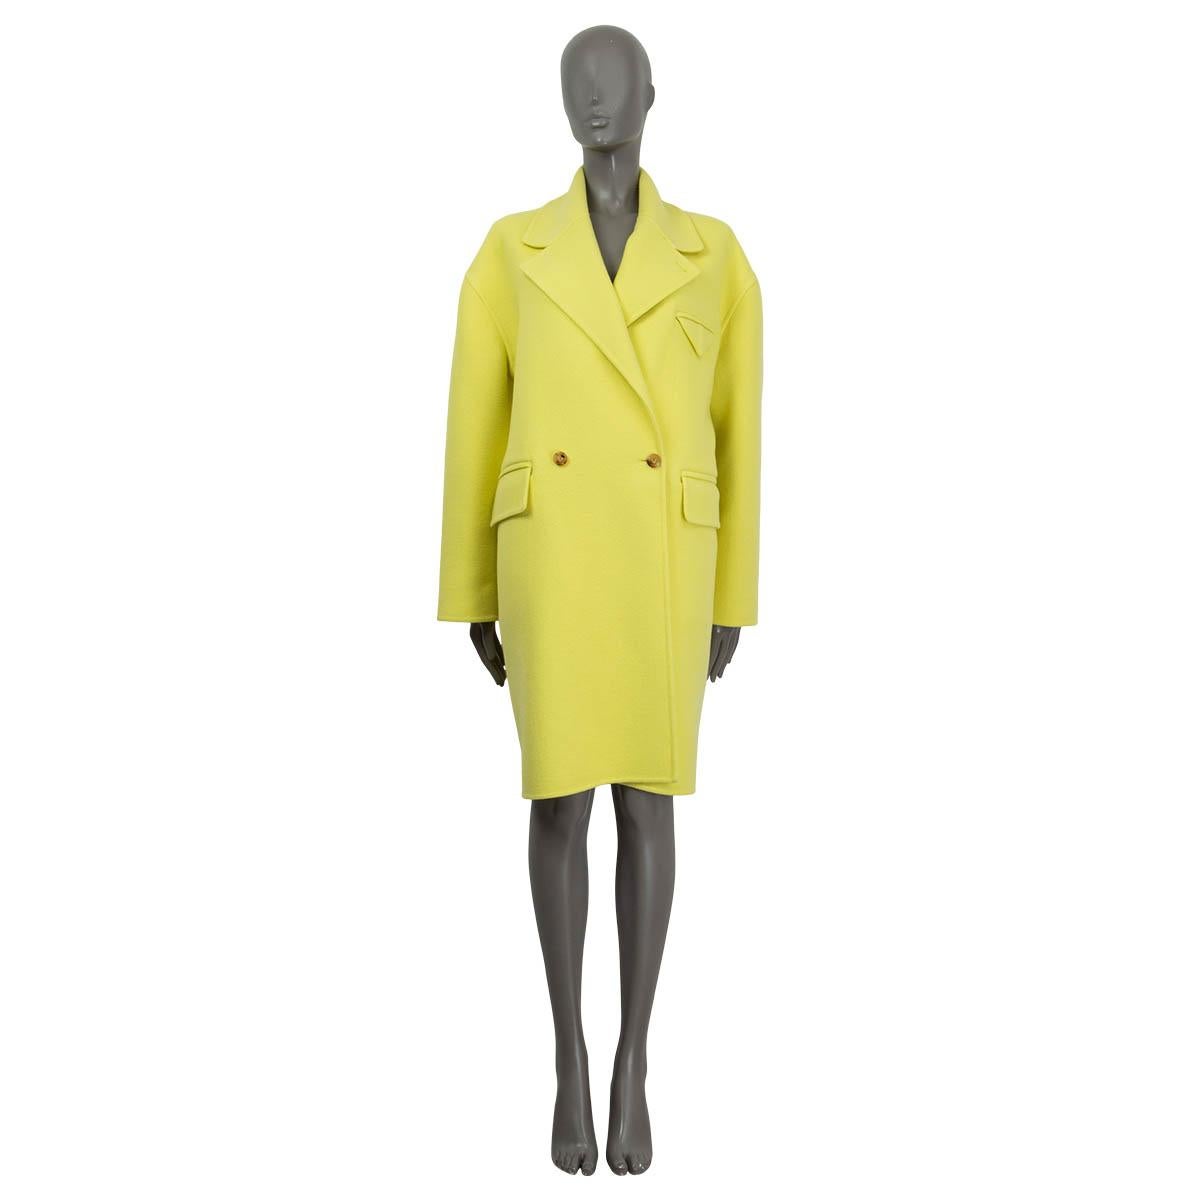 100% authentic Bottega Veneta 2022 oversized coat in kiwi cashmere (100%). Features long sleeves, two flap pockets on the front and a sewn shut chest pocket. Opens with two buttons on the front. Unlined. Has been worn once or twice and is in